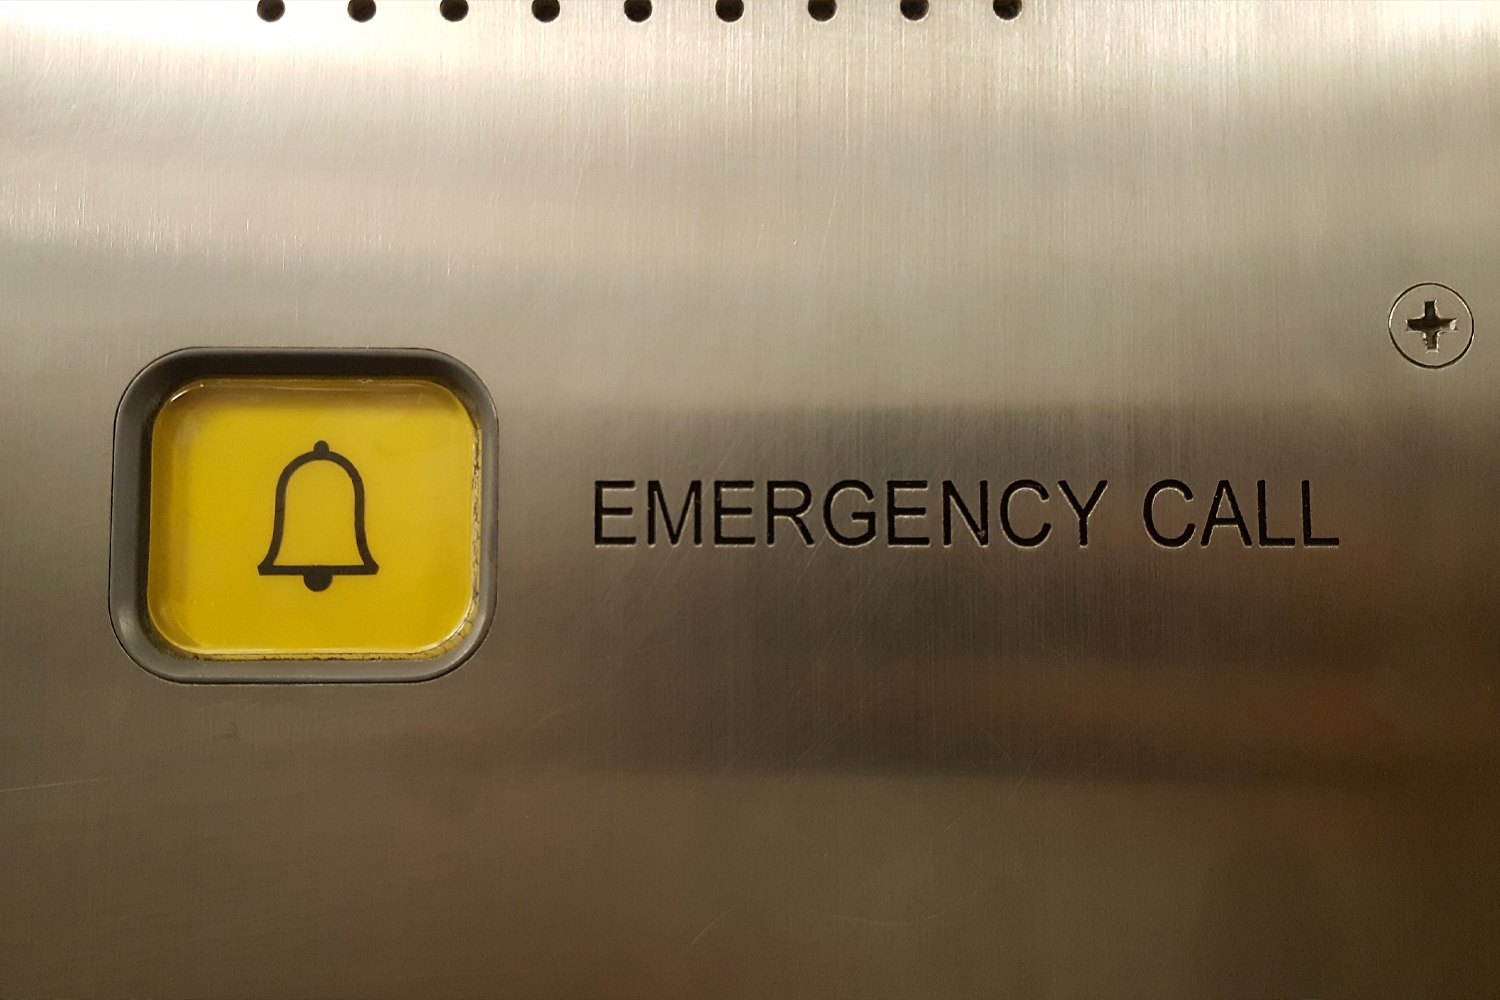 Elevator Phones - Where do they call in an emergency